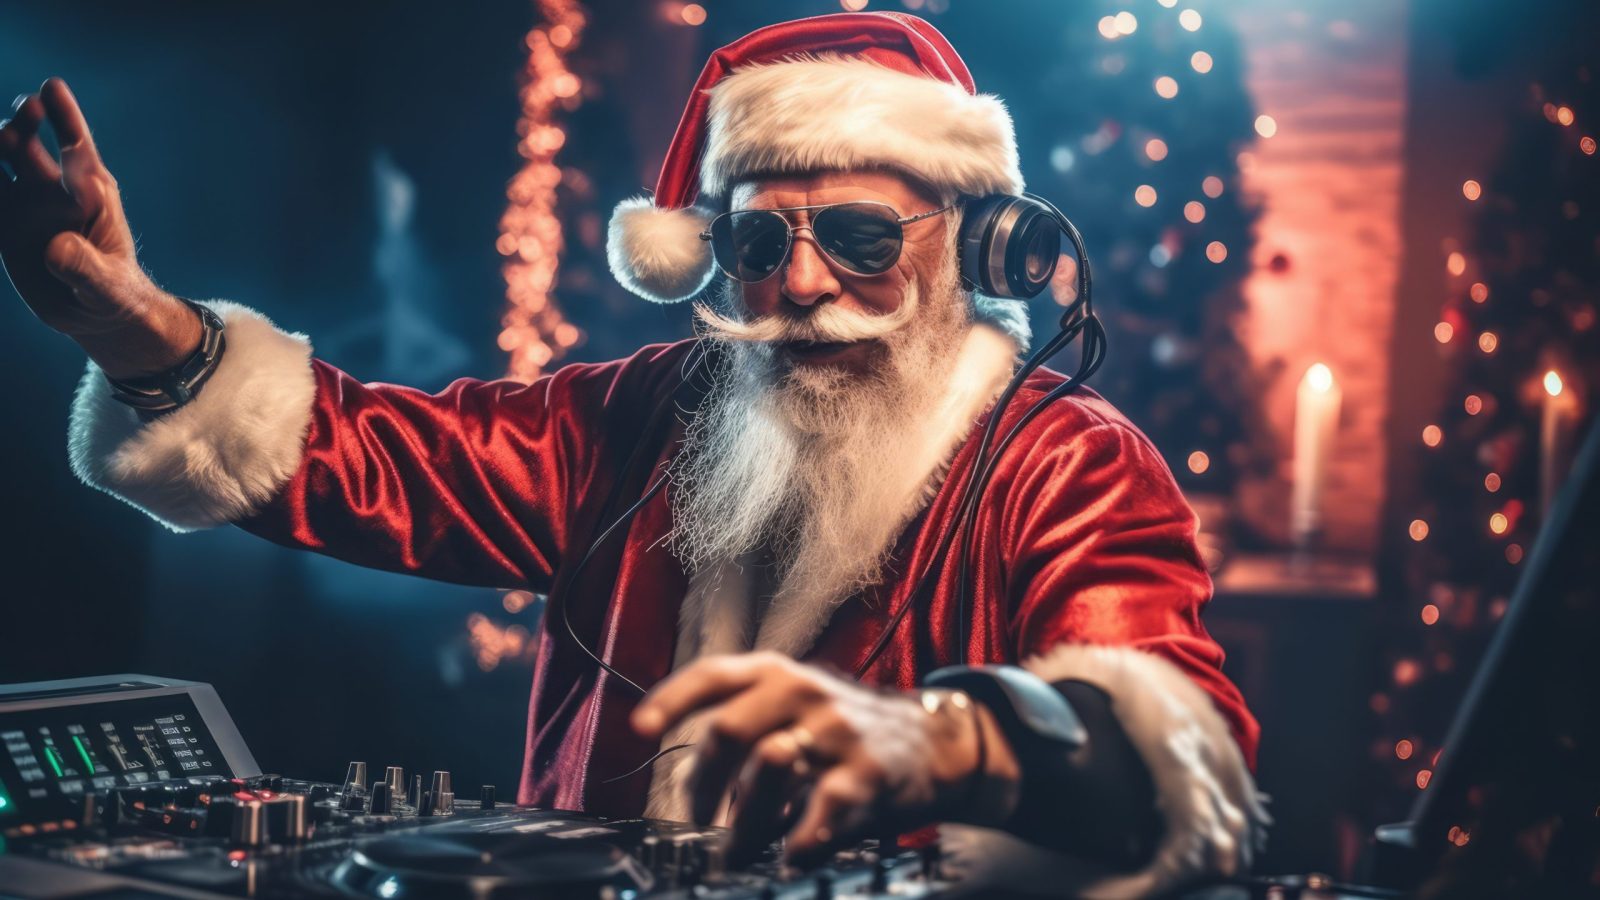 A lively Christmas party featuring Santa Claus as the DJ in a festive outfit, mixing tracks on a DJ mixer. The party is filled with energy and holiday cheer. Generative AI